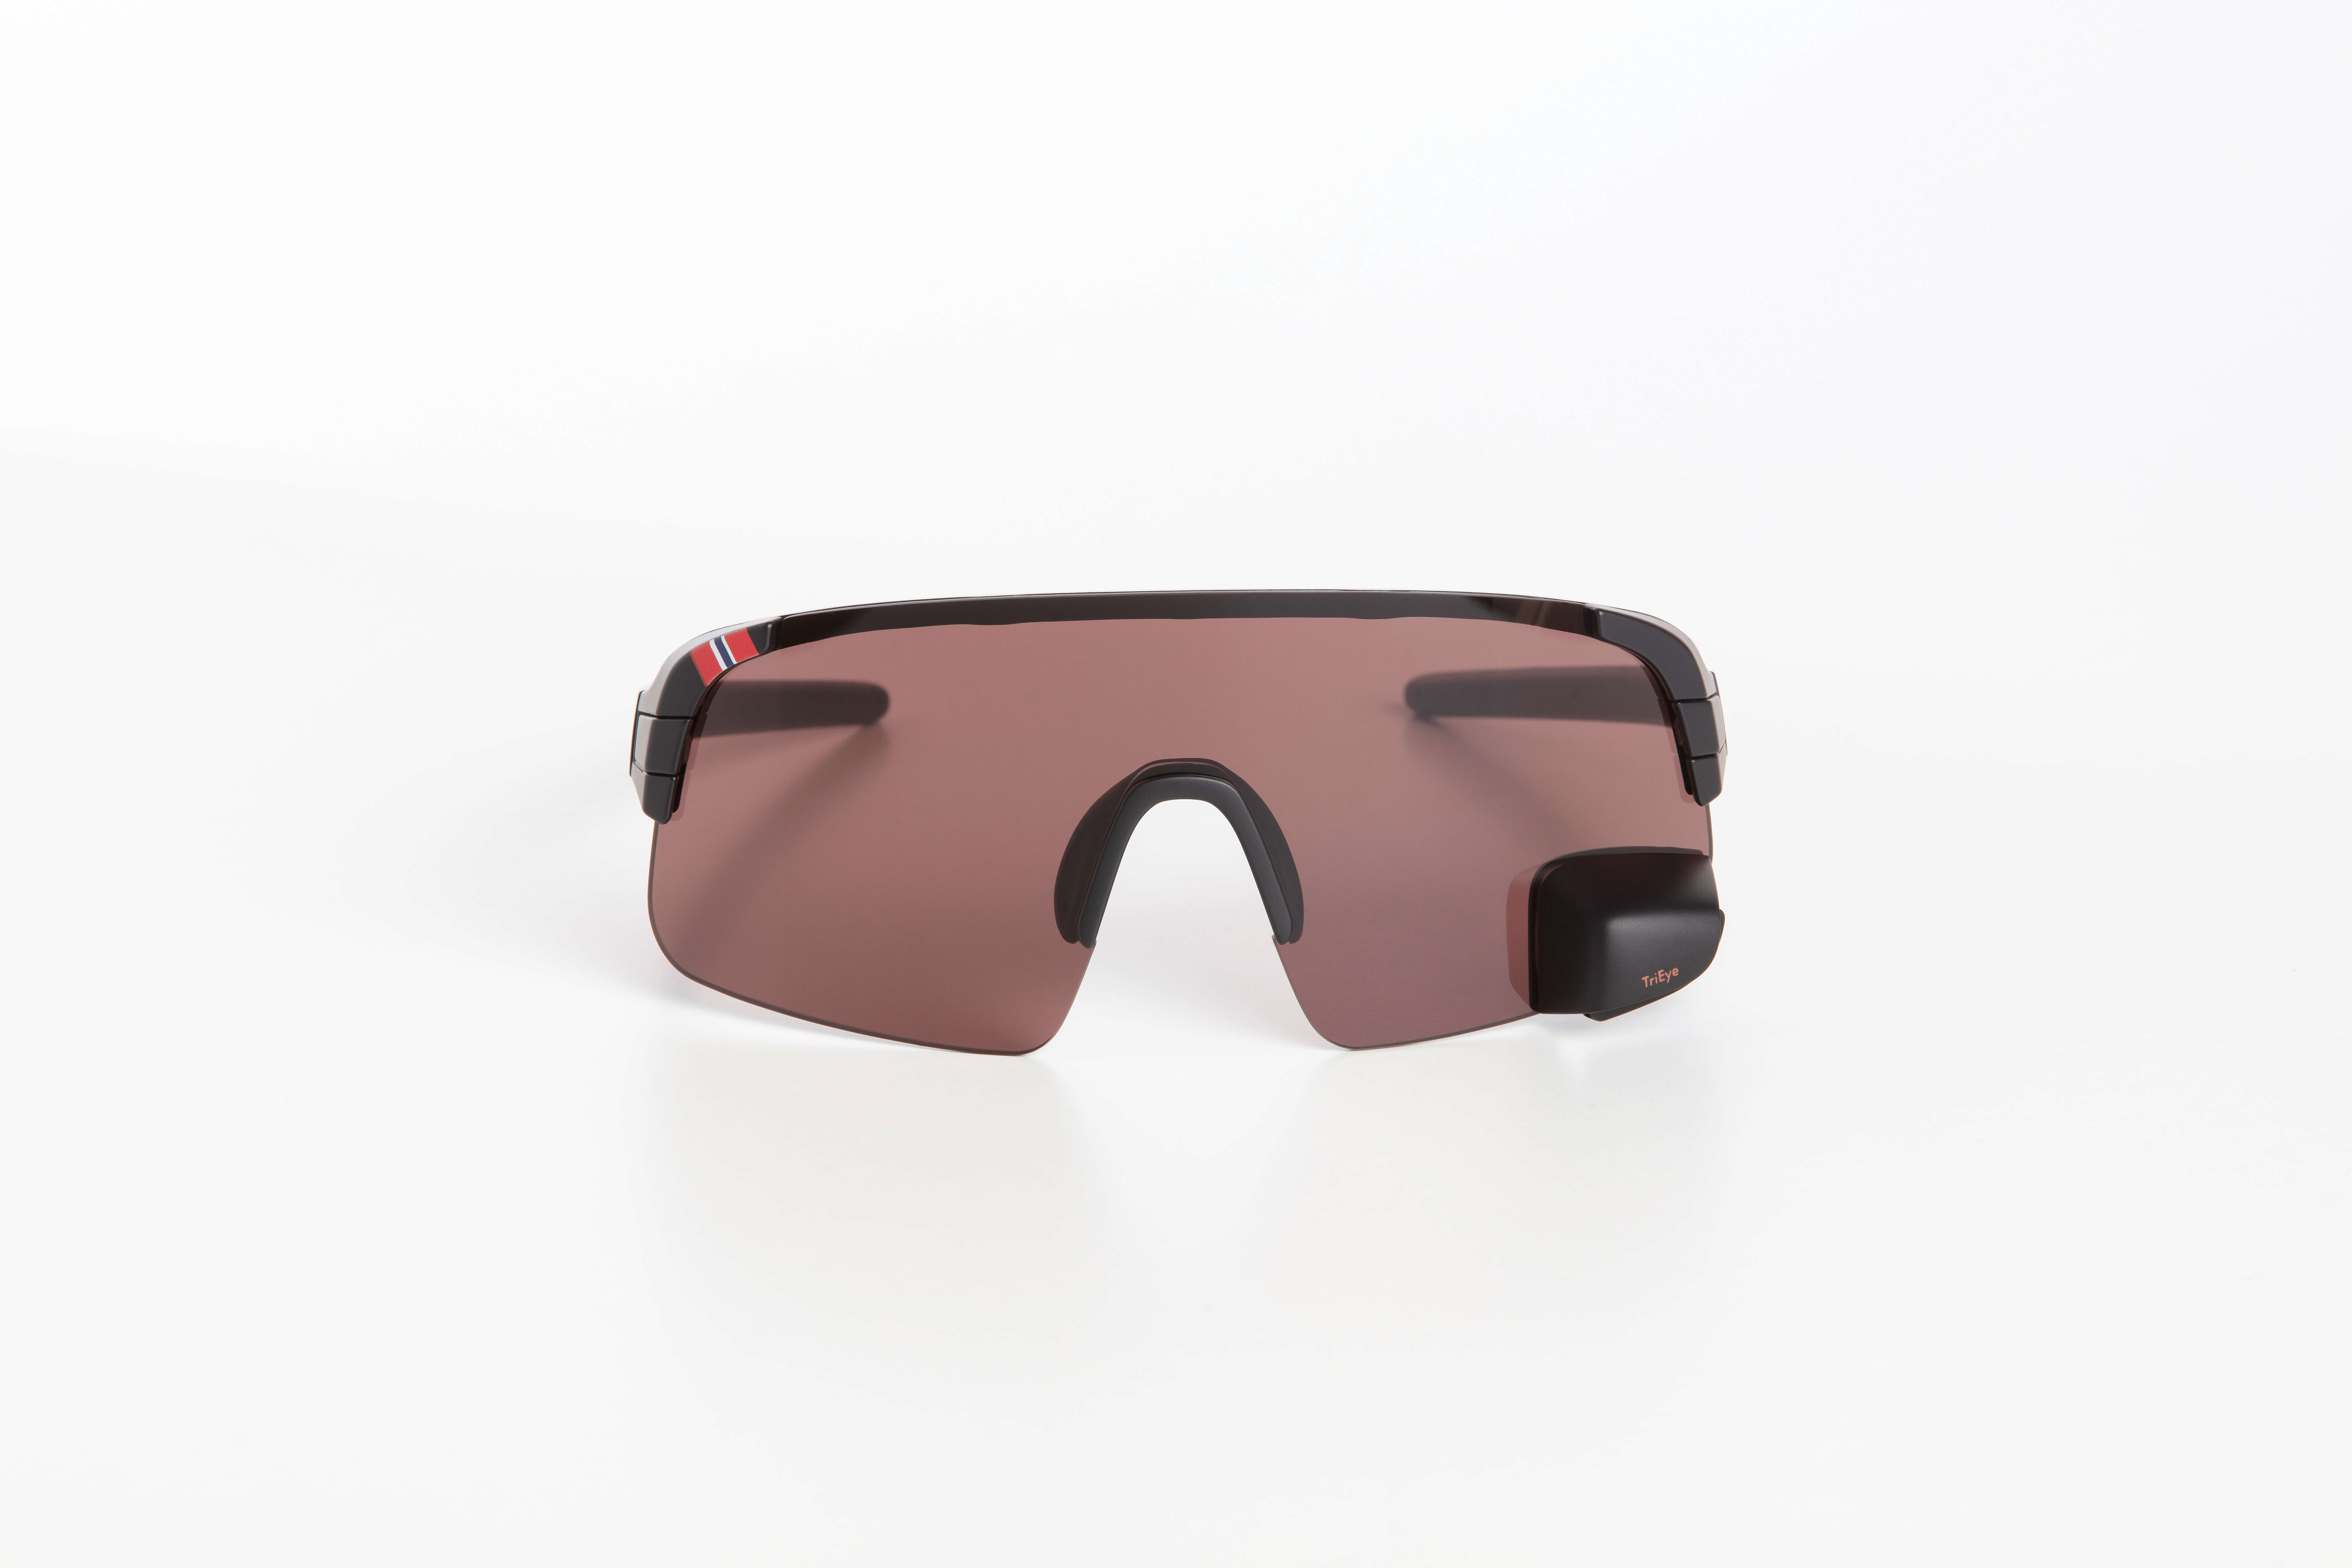 TriEye View Sport High Definition frontal